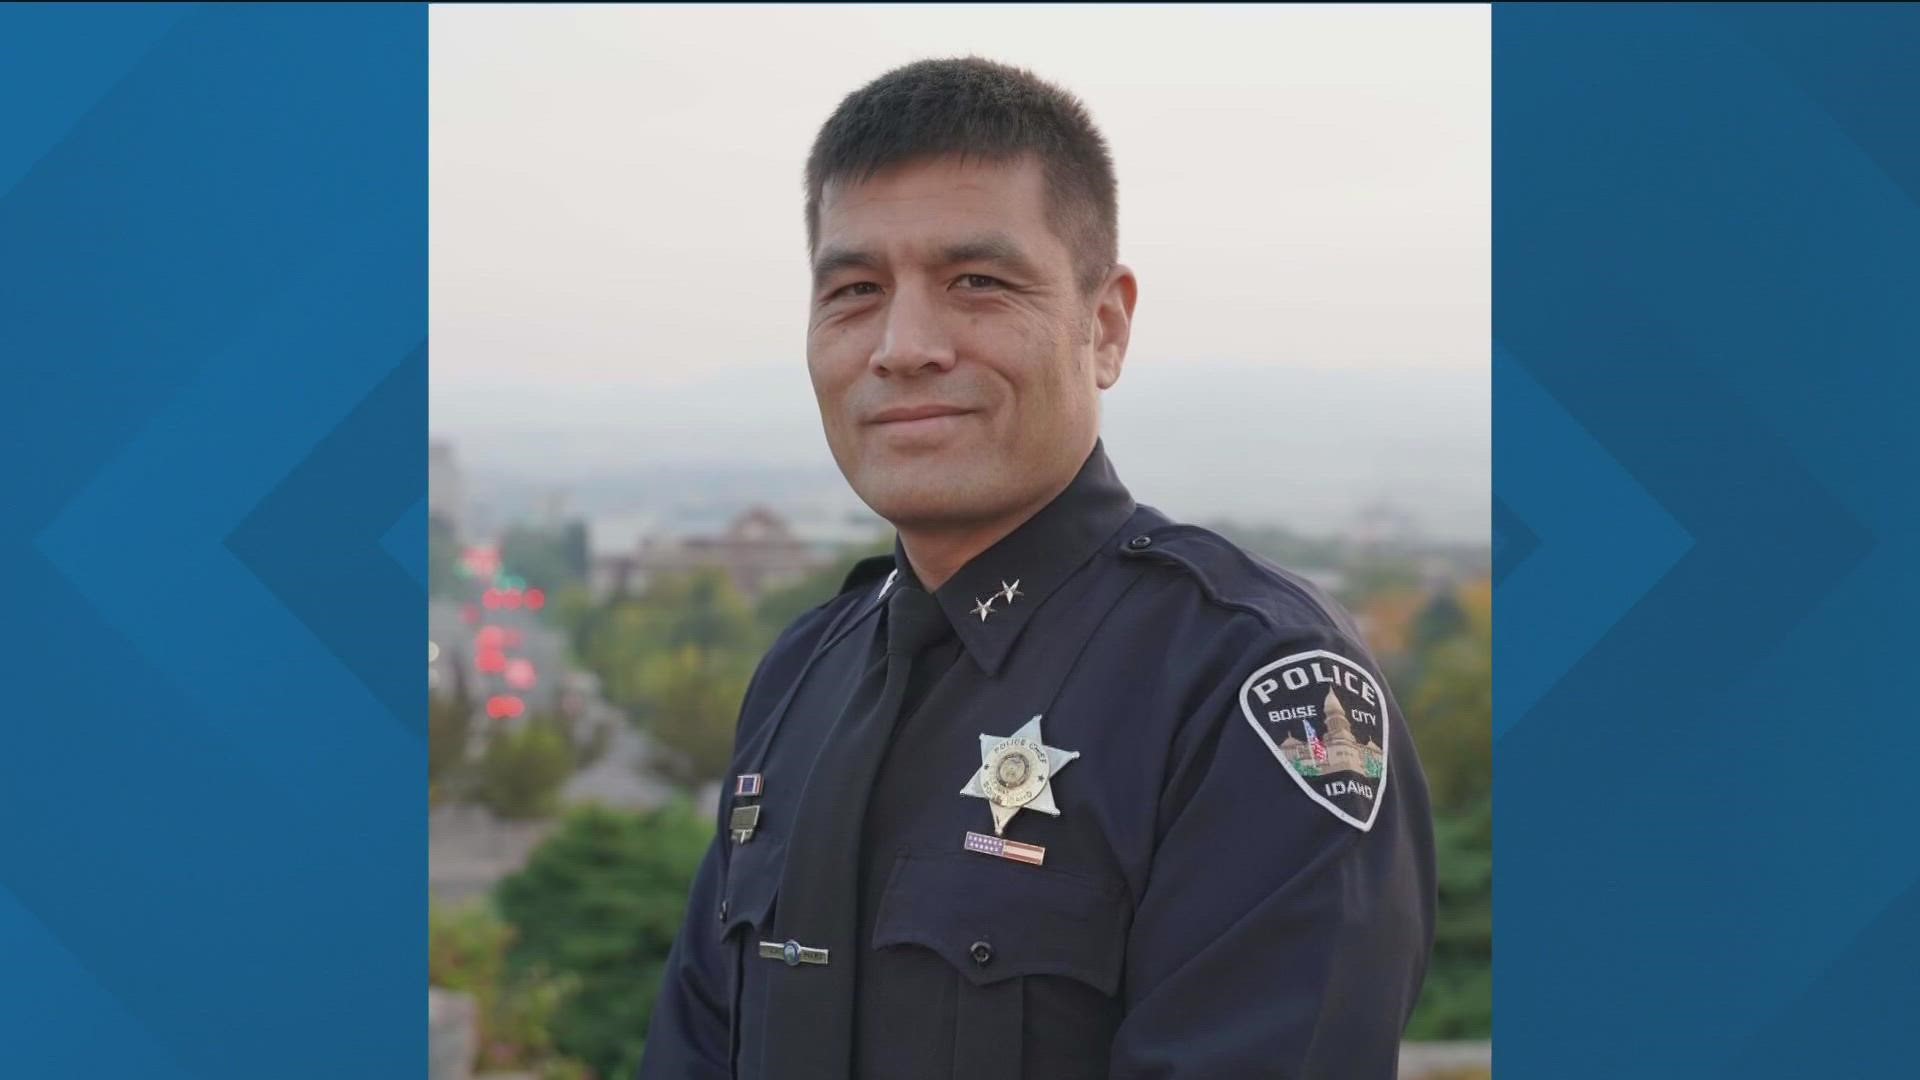 Nine officers filed complaints against their Boise police chief. It was recommended that the chief be placed on leave. It never happened.